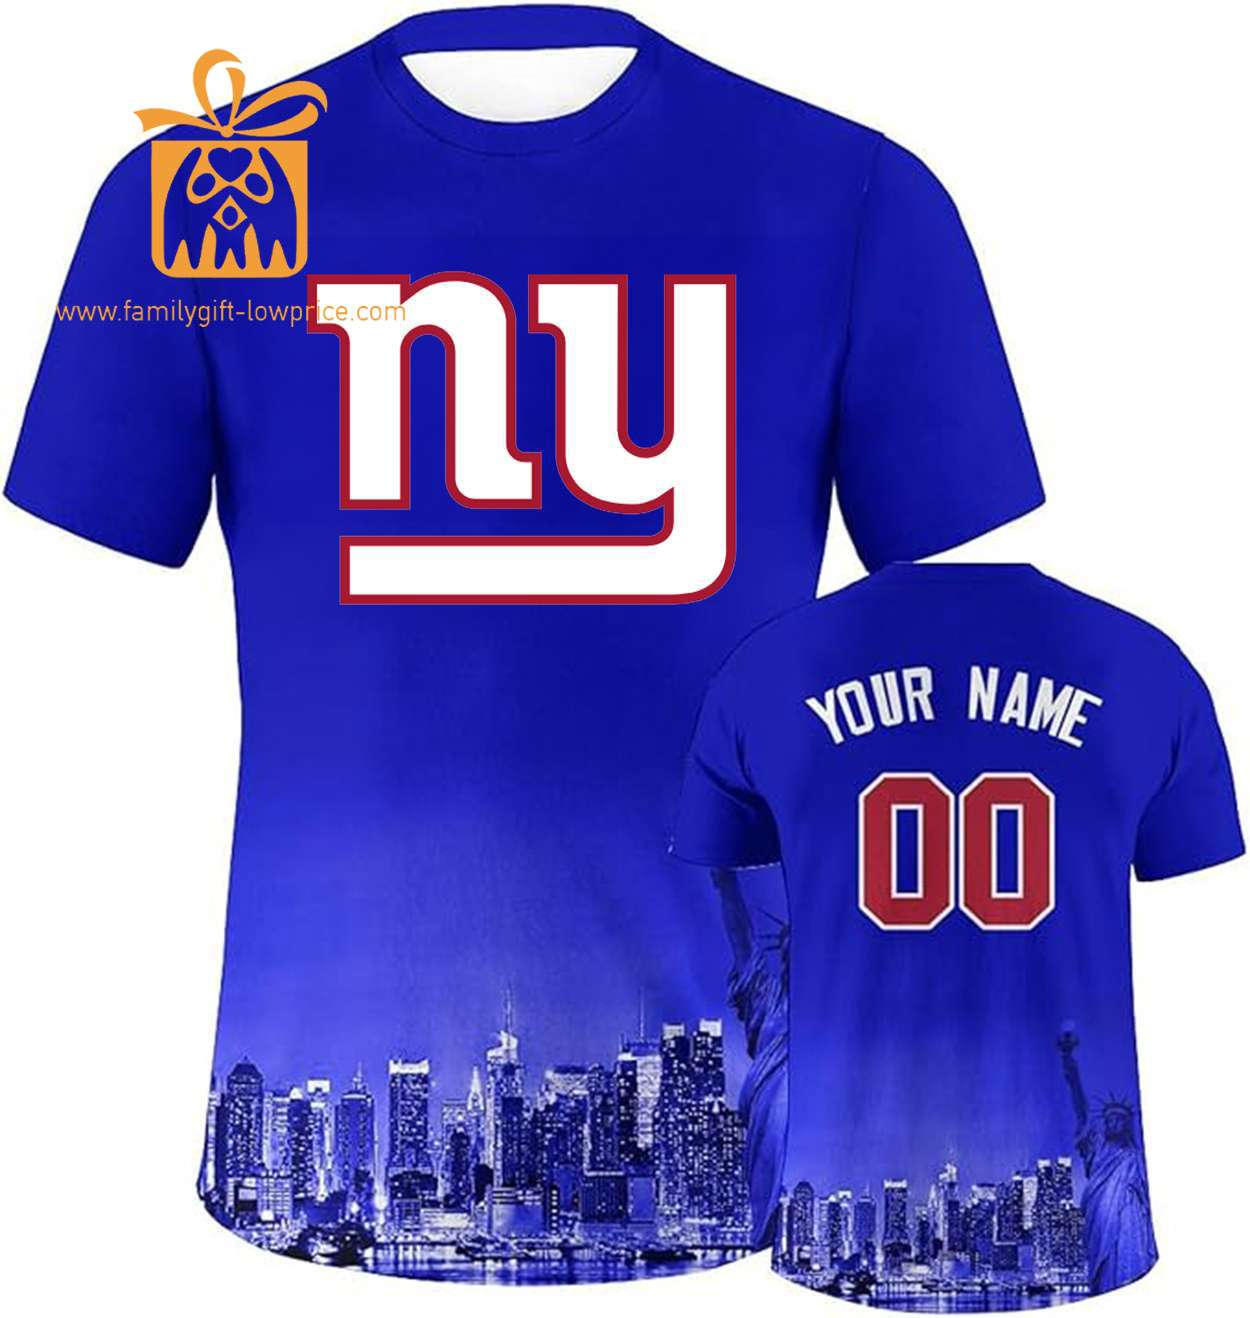 New York Giants Custom Football Shirts – Personalized Name & Number, Ideal for Fans